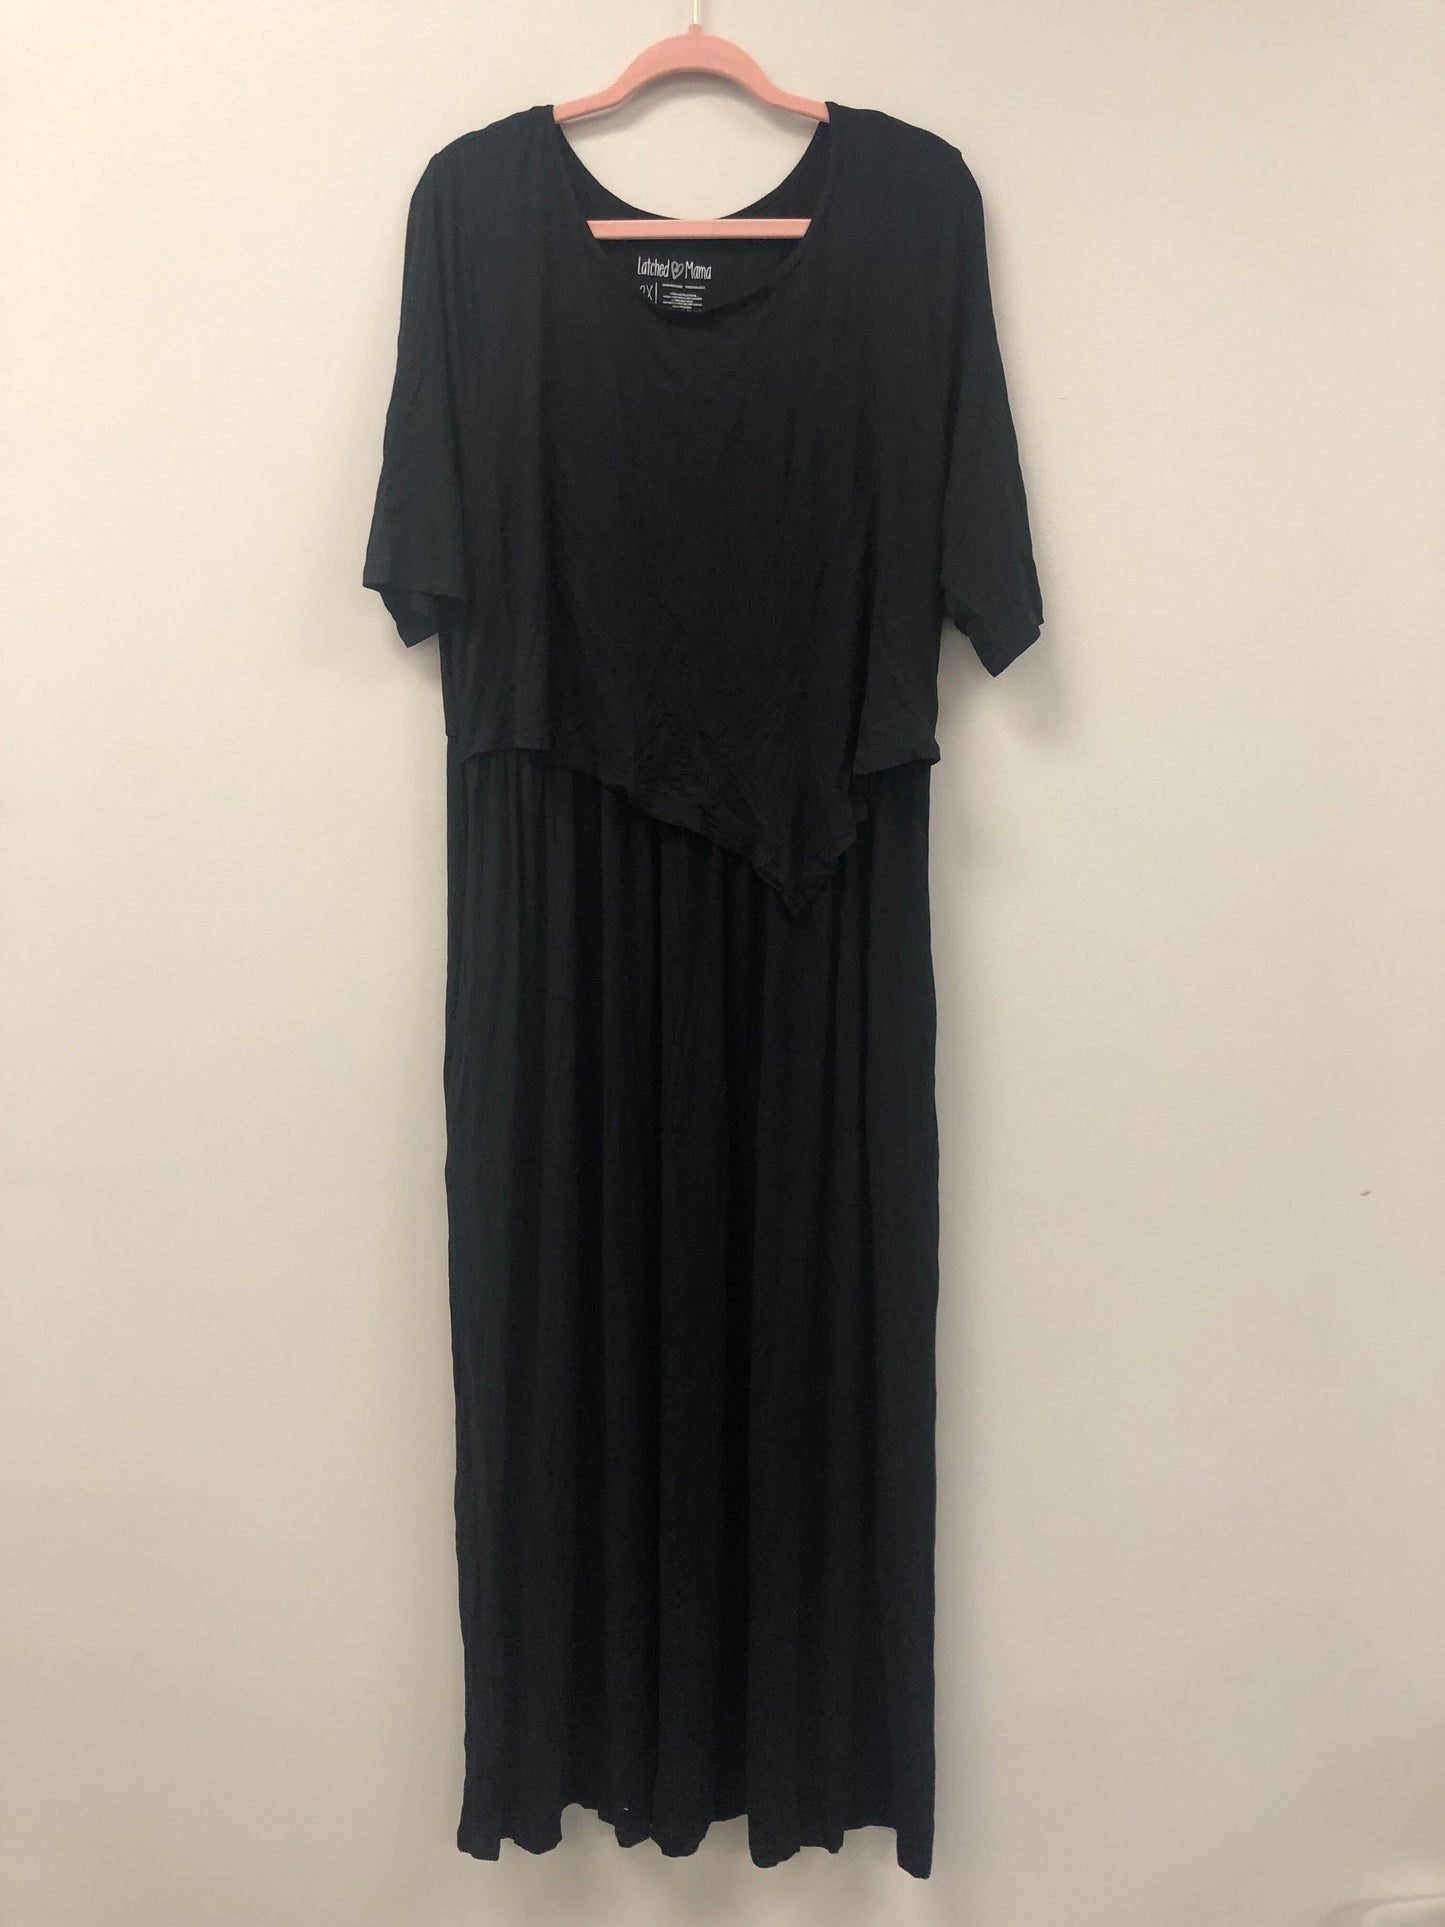 Outlet 5673 - Latched Mama Front Knot Nursing Maxi Dress - Black - 2X